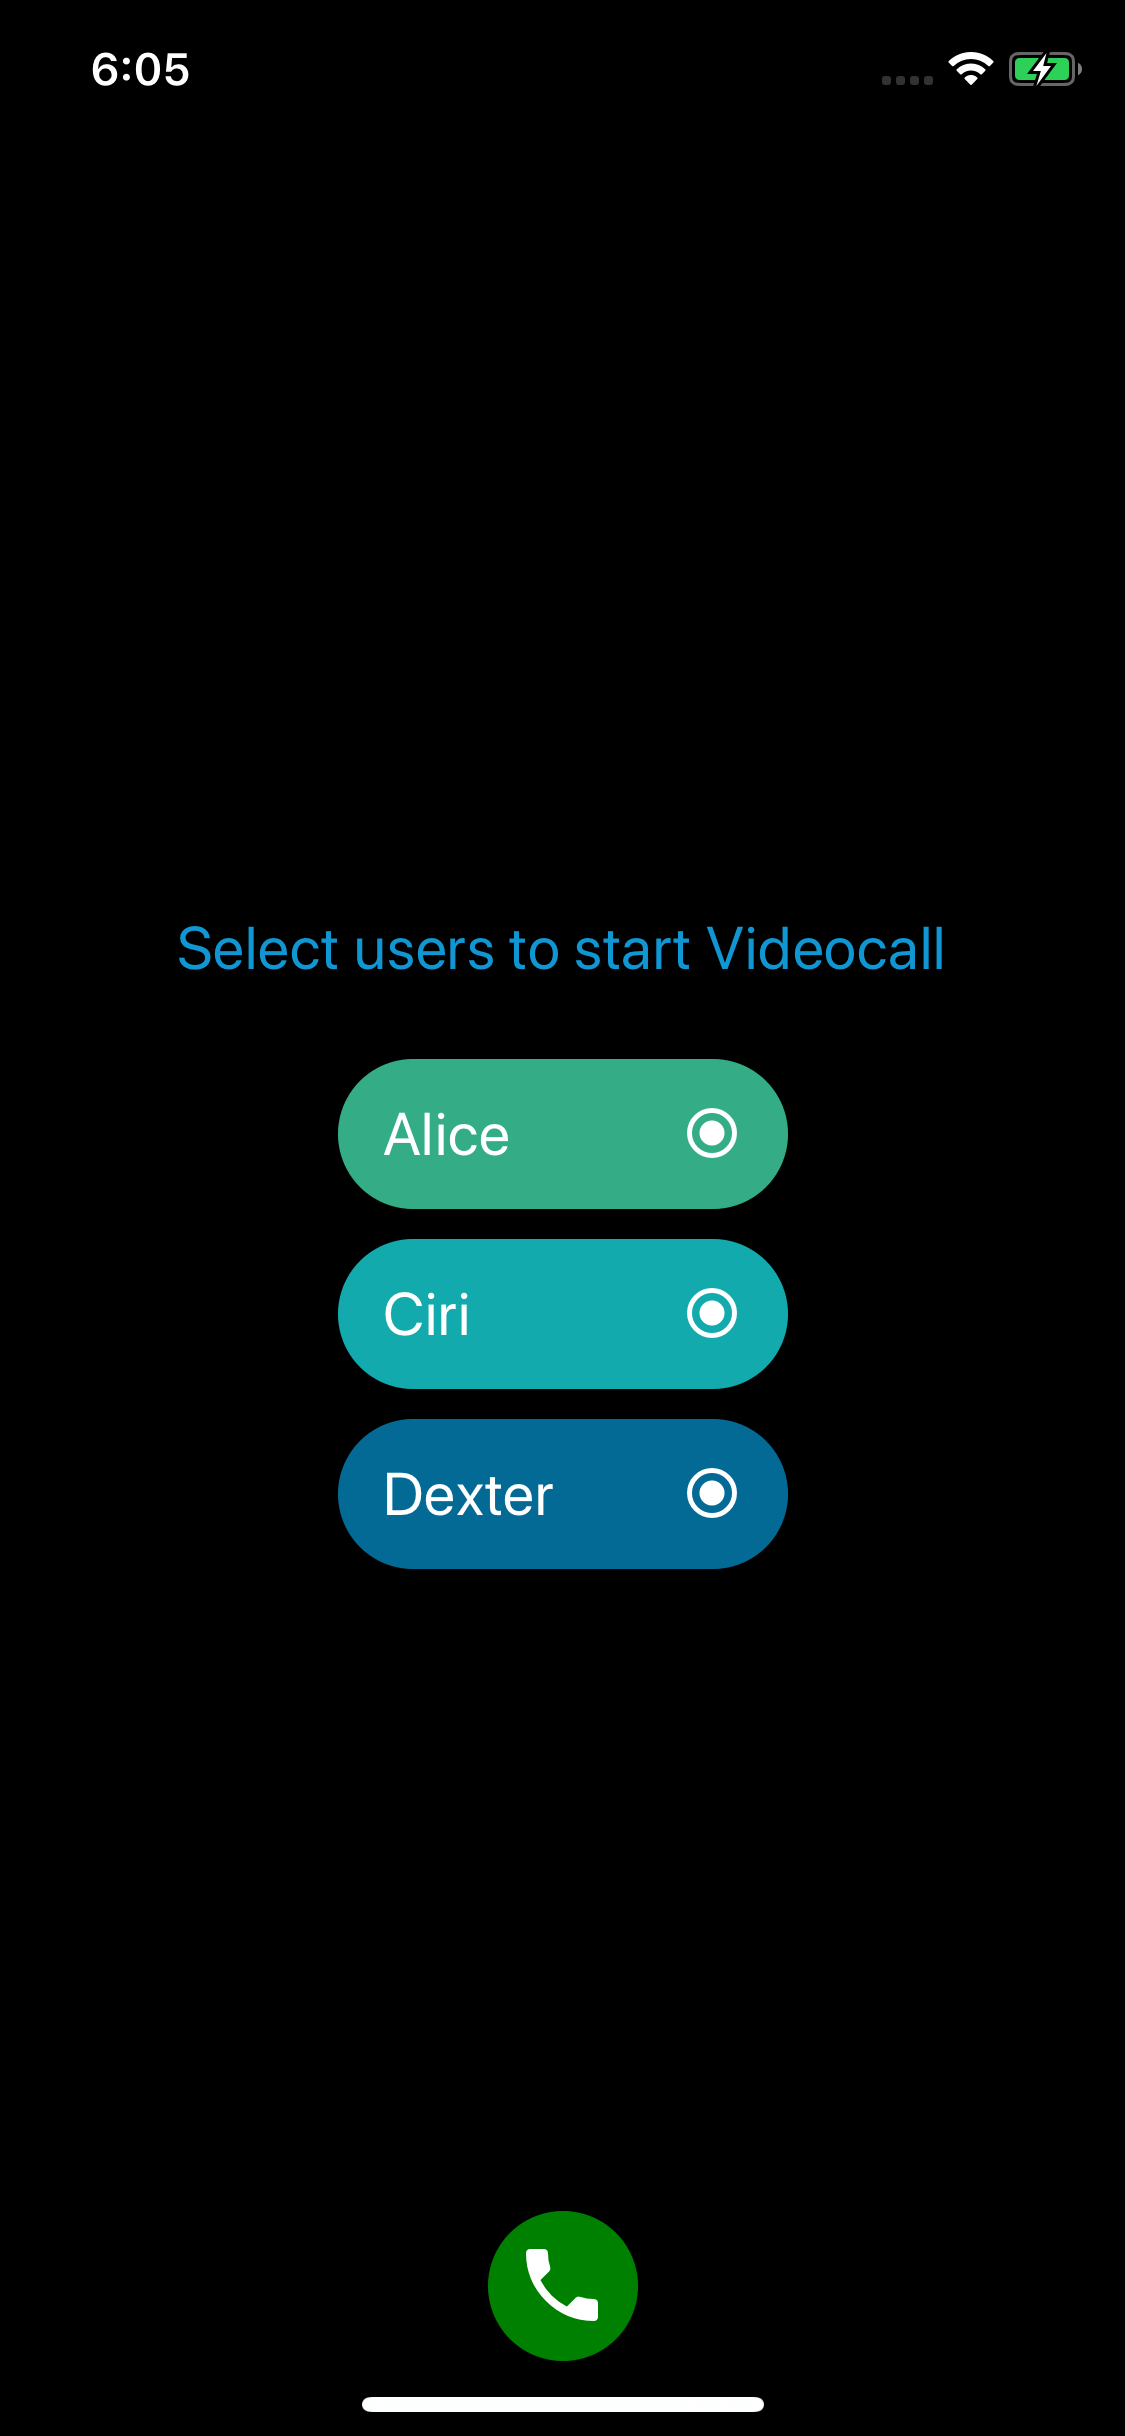 React Native video chat code sample, select users